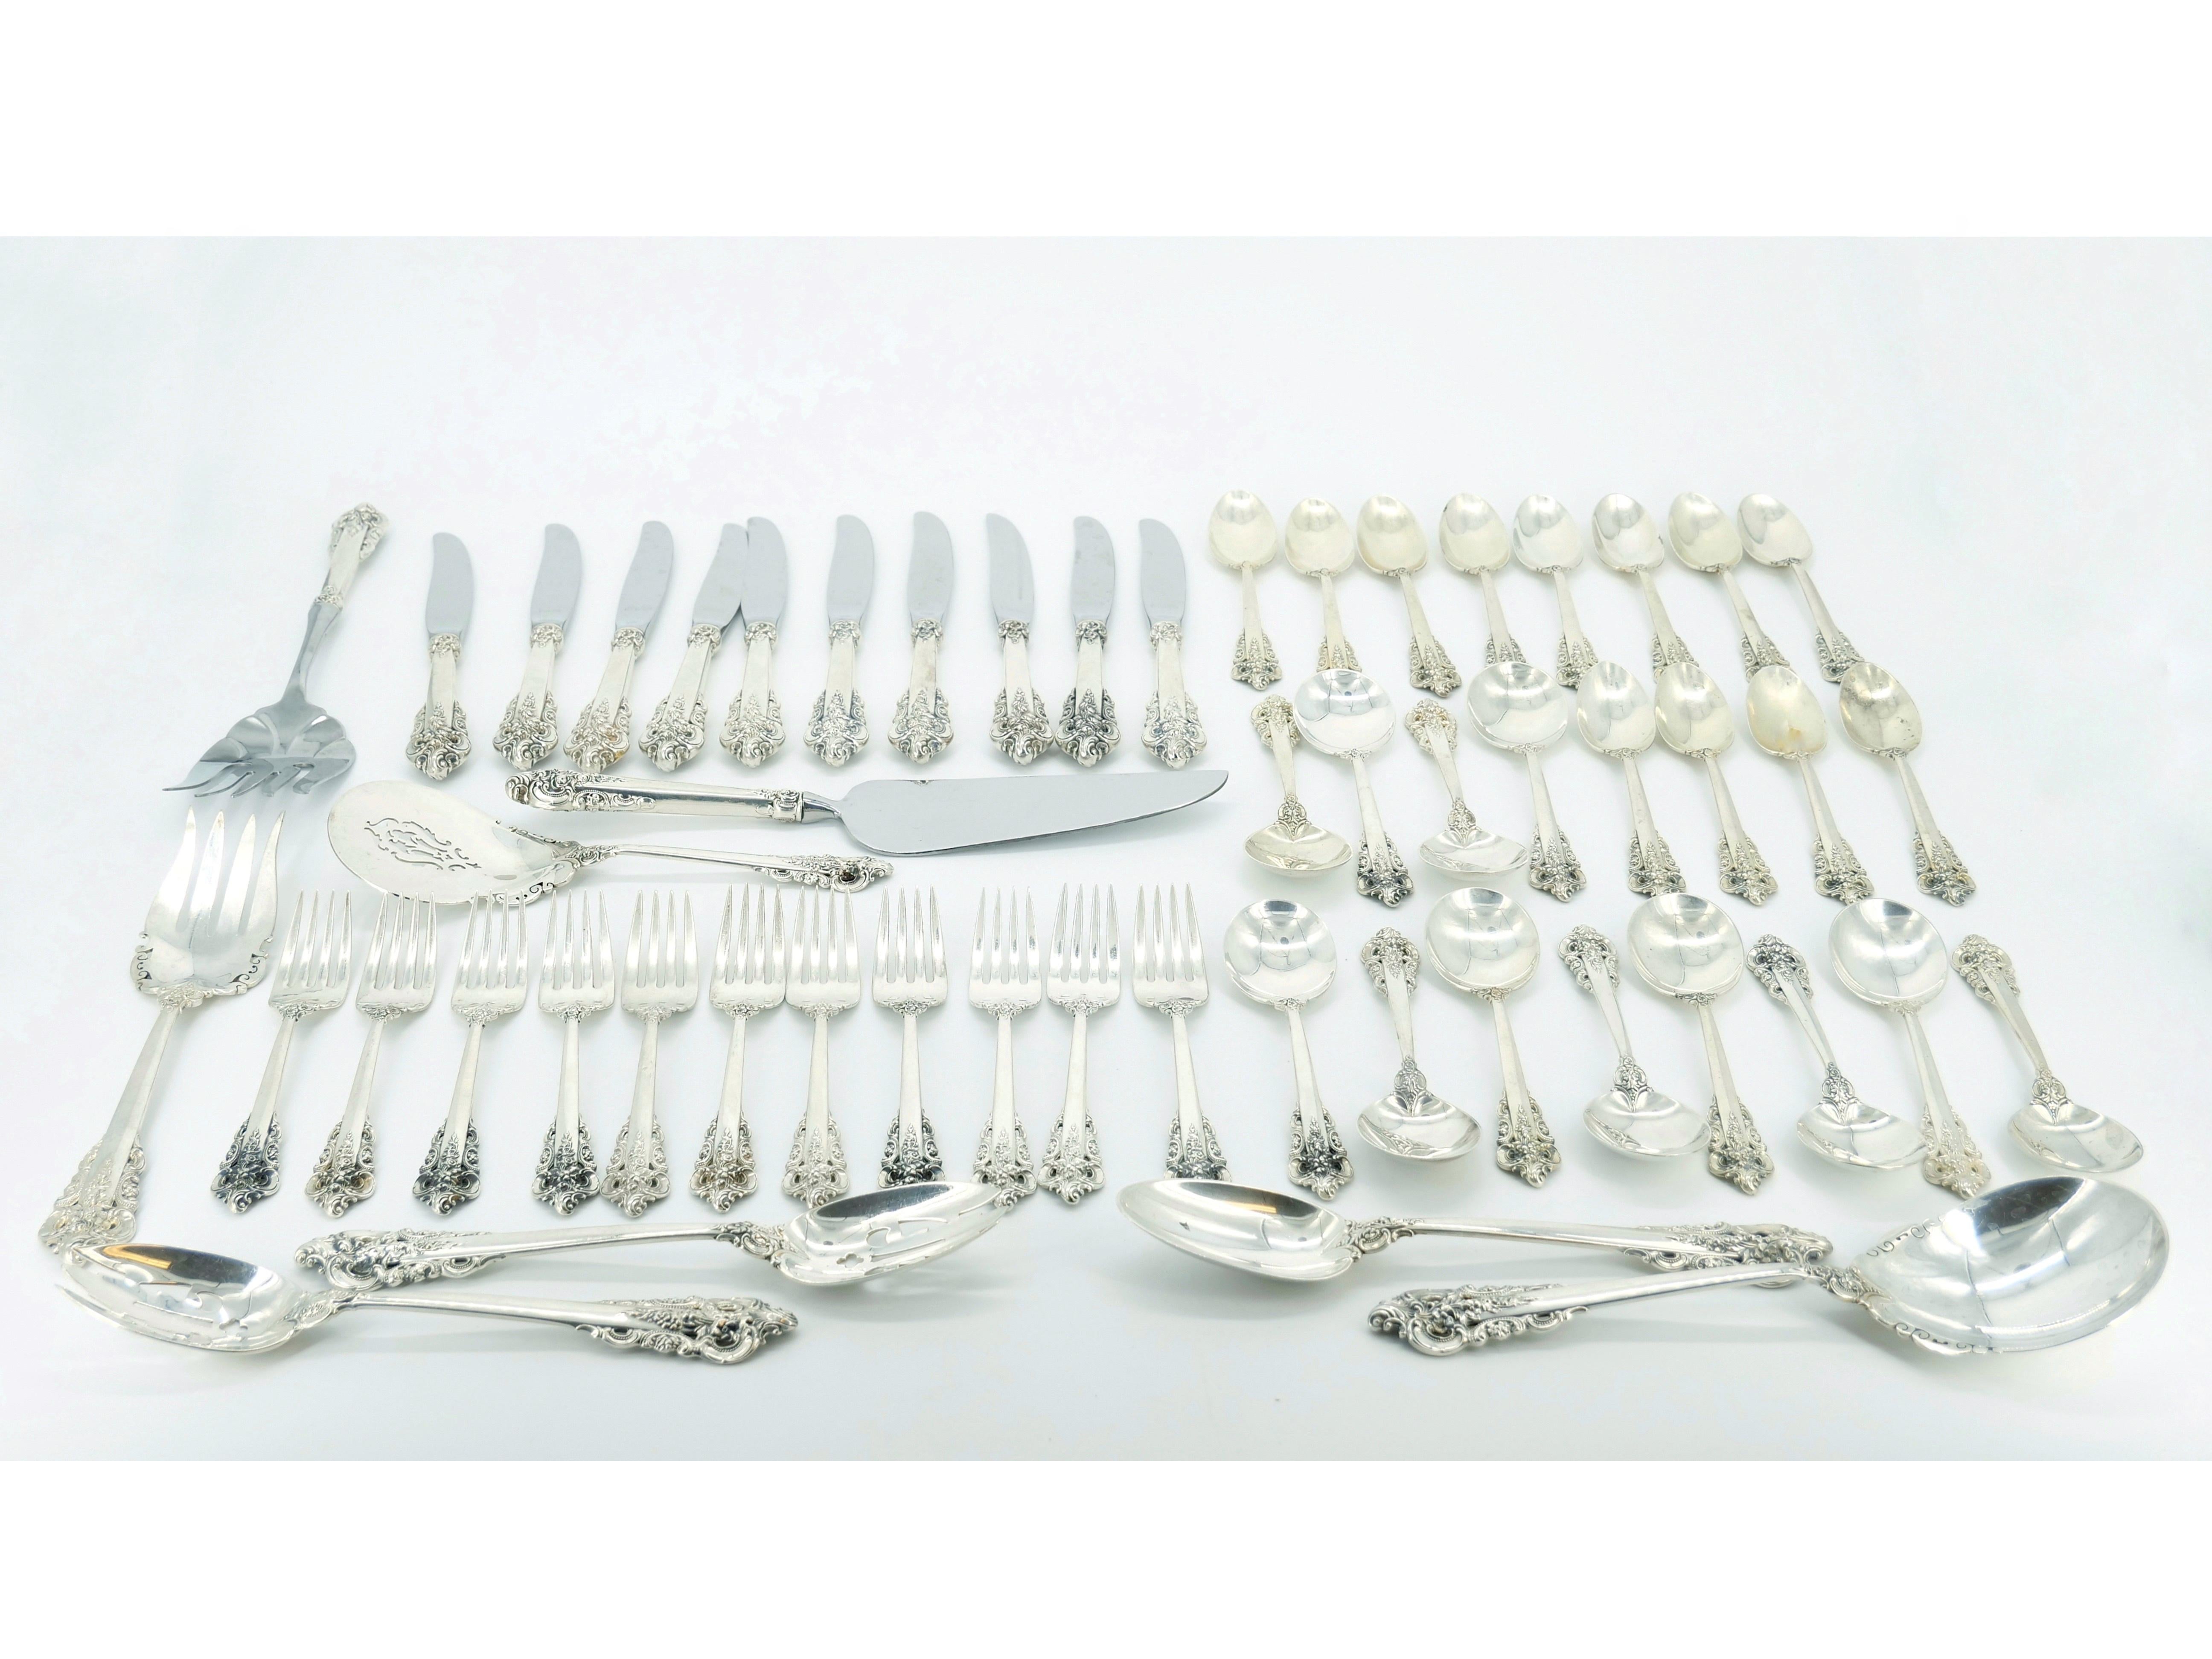 North American Early 20th Century Sterling Silver Flatware Service For 24 People For Sale